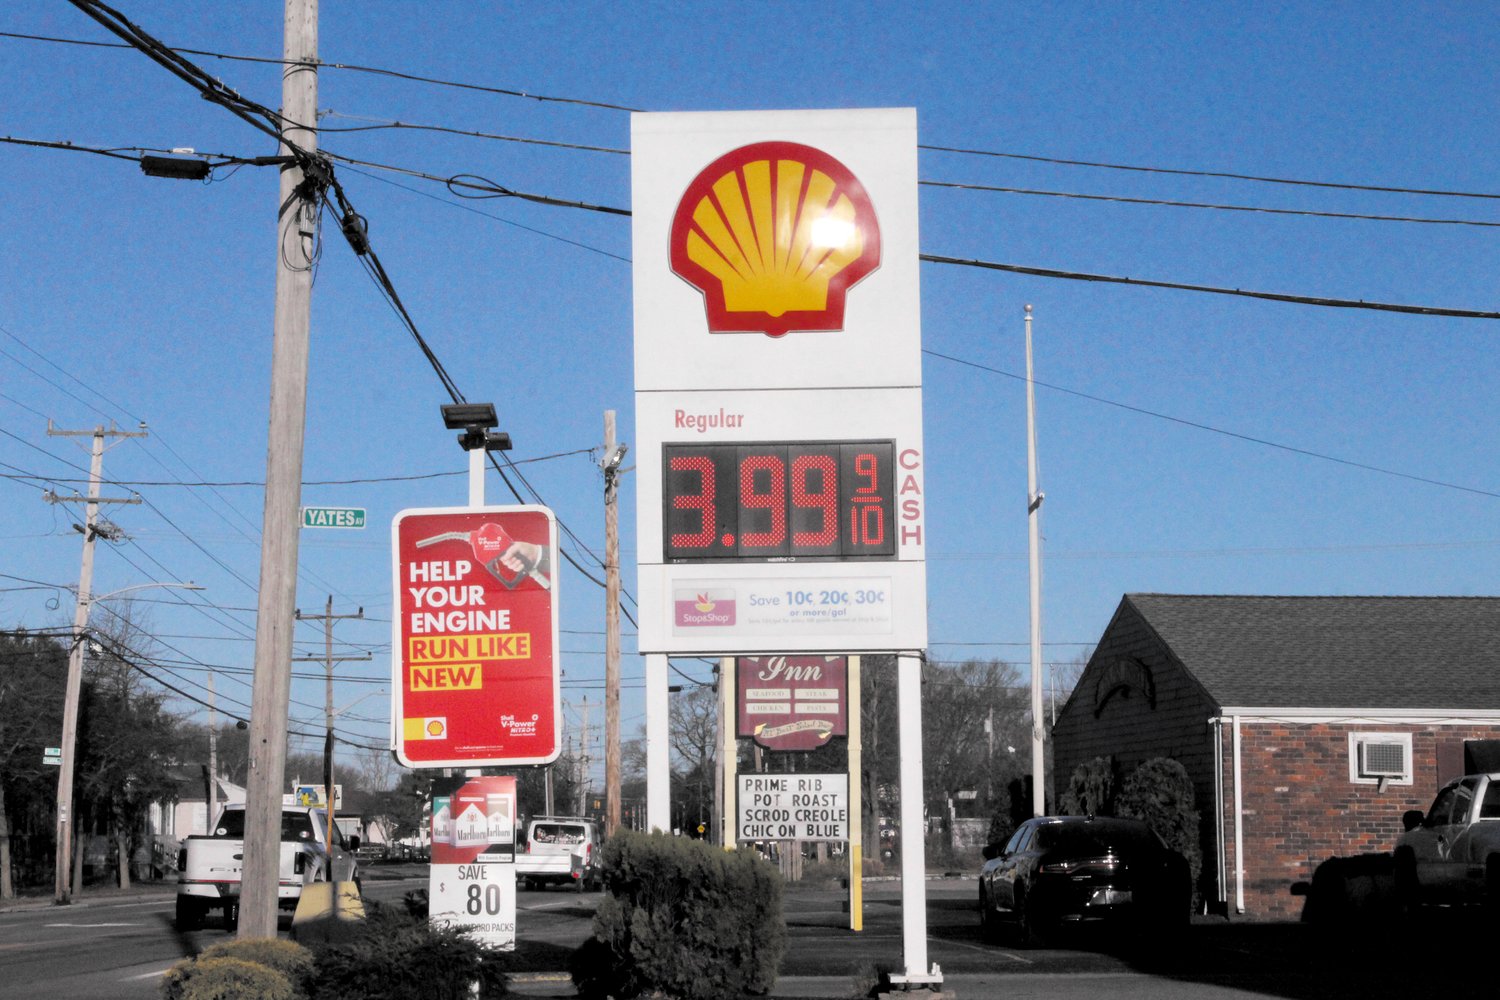 UNDER THE $4 BARRIER: Gasoline prices dipped under $4 a gallon this Tuesday at some stations including this Shell station on West Shore Road in Warwick.